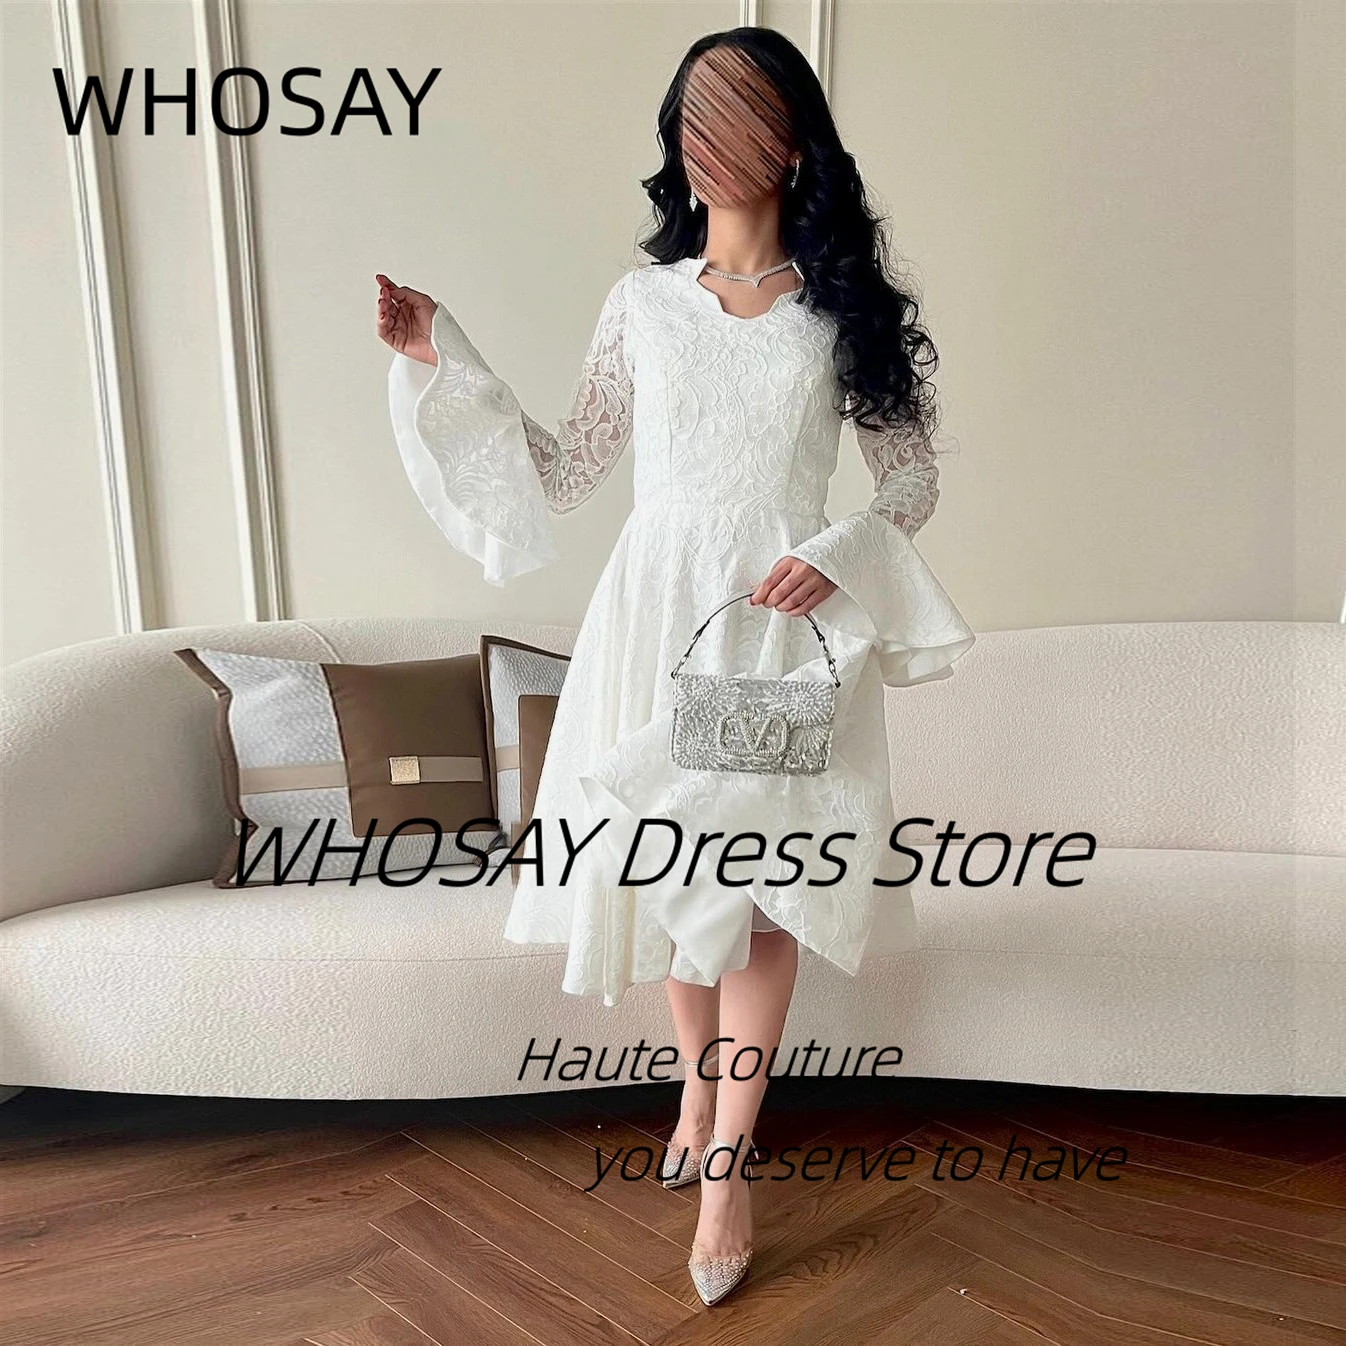 

WHOSAY Full Lace Short Prom Dresses Tea Length Homecoming Party Girls Wear A Line Graduation Dress Long Sleeves Evening Gowns